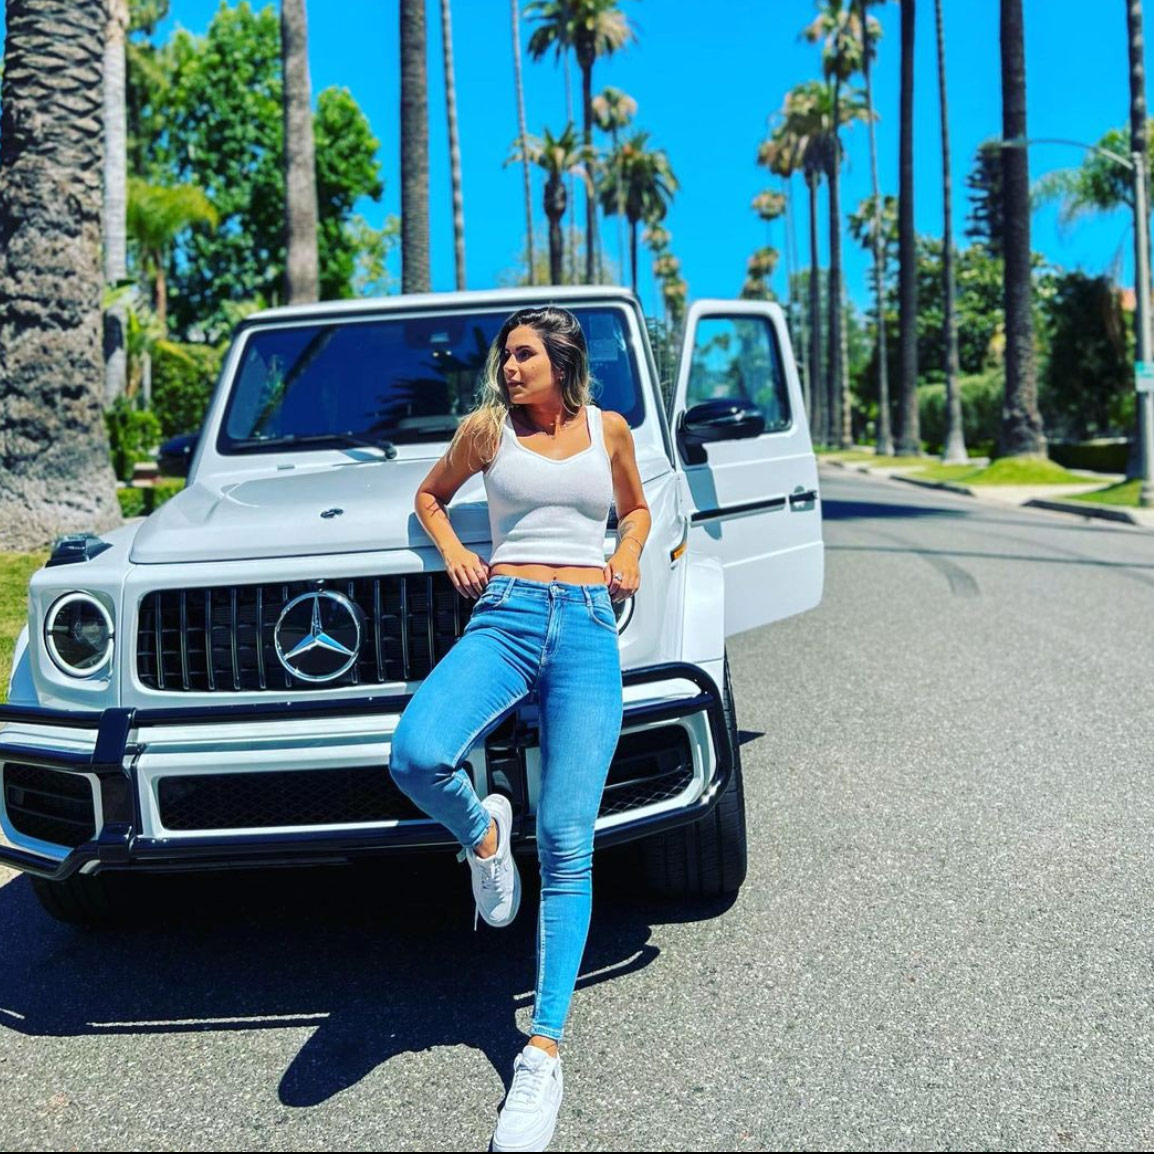 Mercedes Benz G 63 AMG white luxury suv 4x4 car rental with a woman in front of it